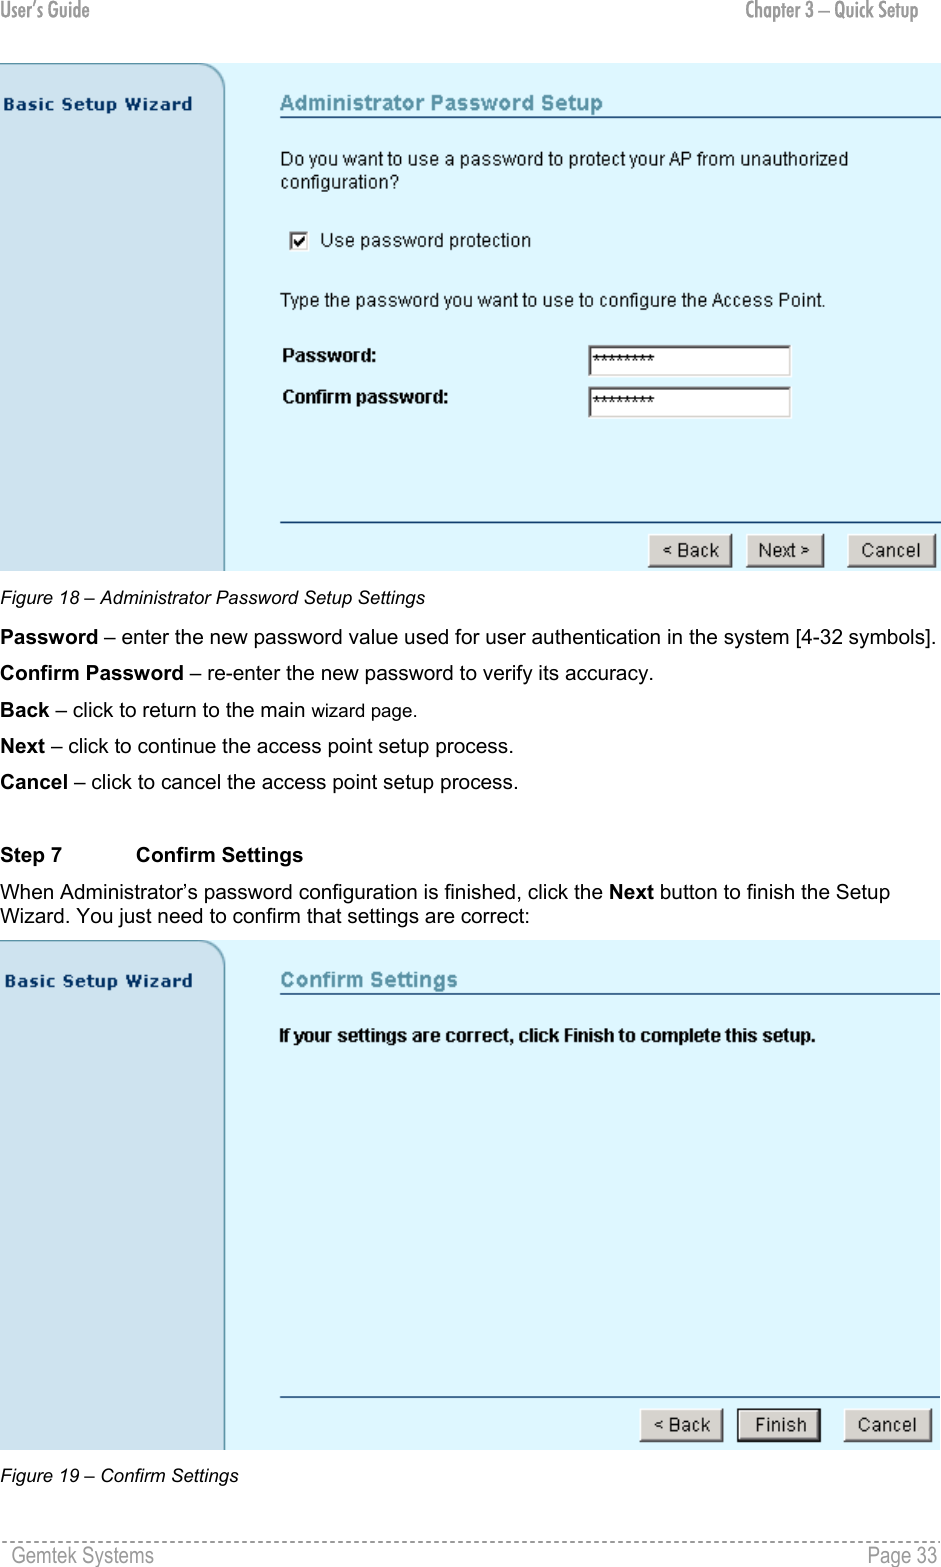 User’s Guide  Chapter 3 – Quick Setup  Figure 18 – Administrator Password Setup Settings Password – enter the new password value used for user authentication in the system [4-32 symbols]. Confirm Password – re-enter the new password to verify its accuracy. Back – click to return to the main wizard page. Next – click to continue the access point setup process. Cancel – click to cancel the access point setup process.  Step 7  Confirm Settings When Administrator’s password configuration is finished, click the Next button to finish the Setup Wizard. You just need to confirm that settings are correct:  Figure 19 – Confirm Settings Gemtek Systems    Page 33  